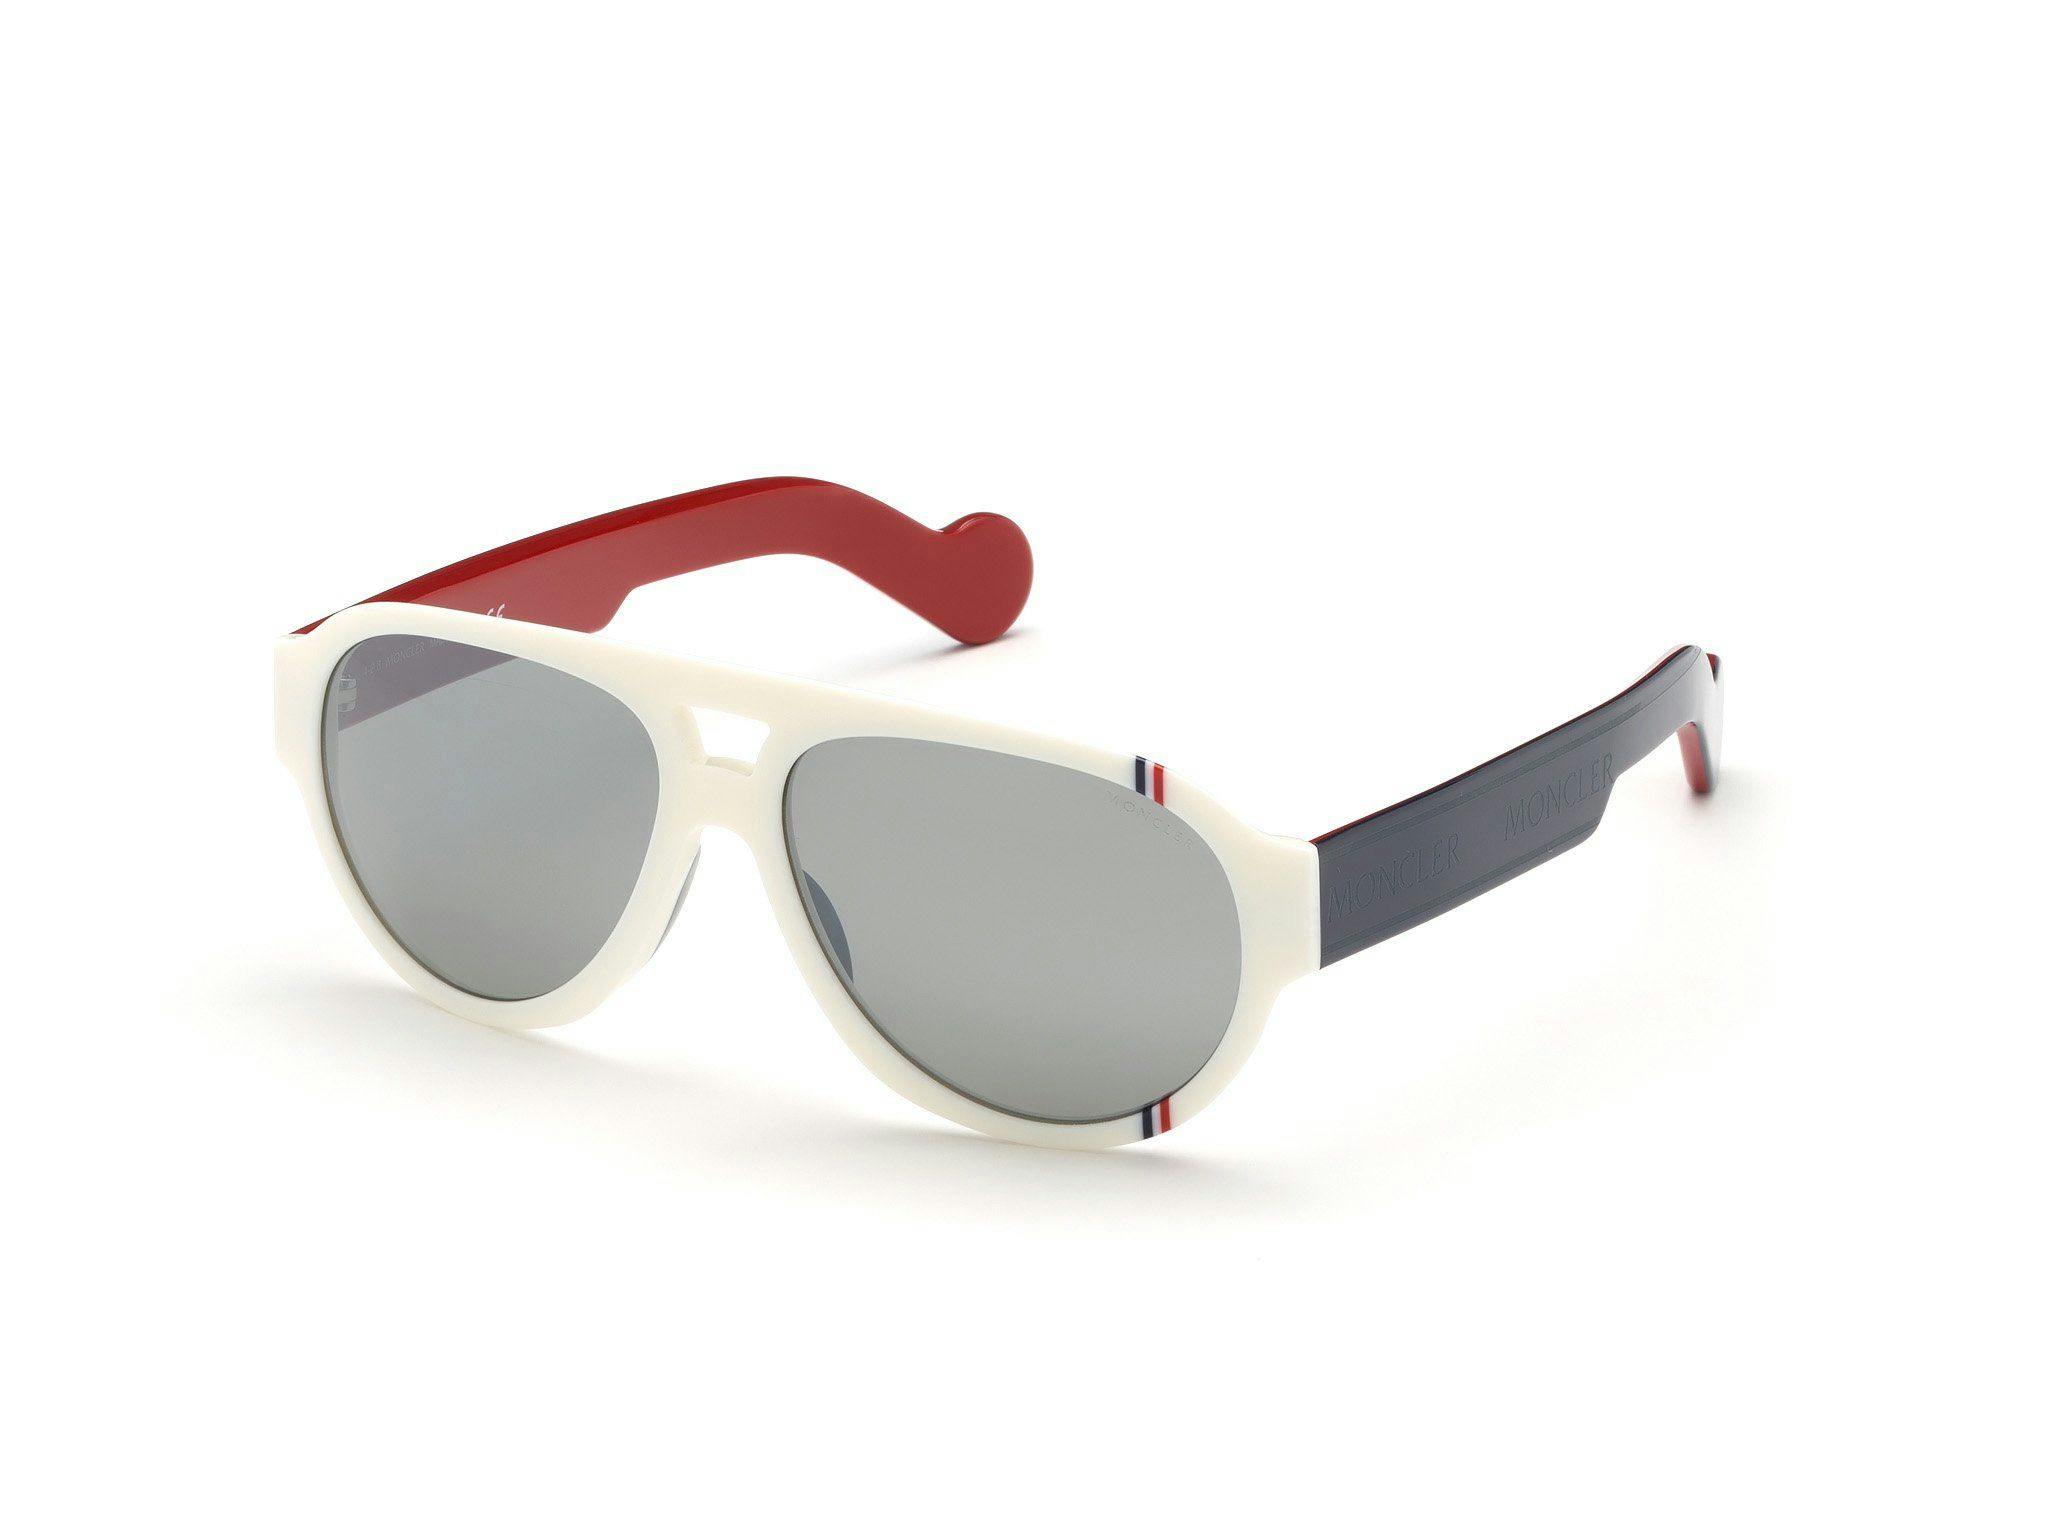 Moncler Lunettes release sunglass, eyeglass collections